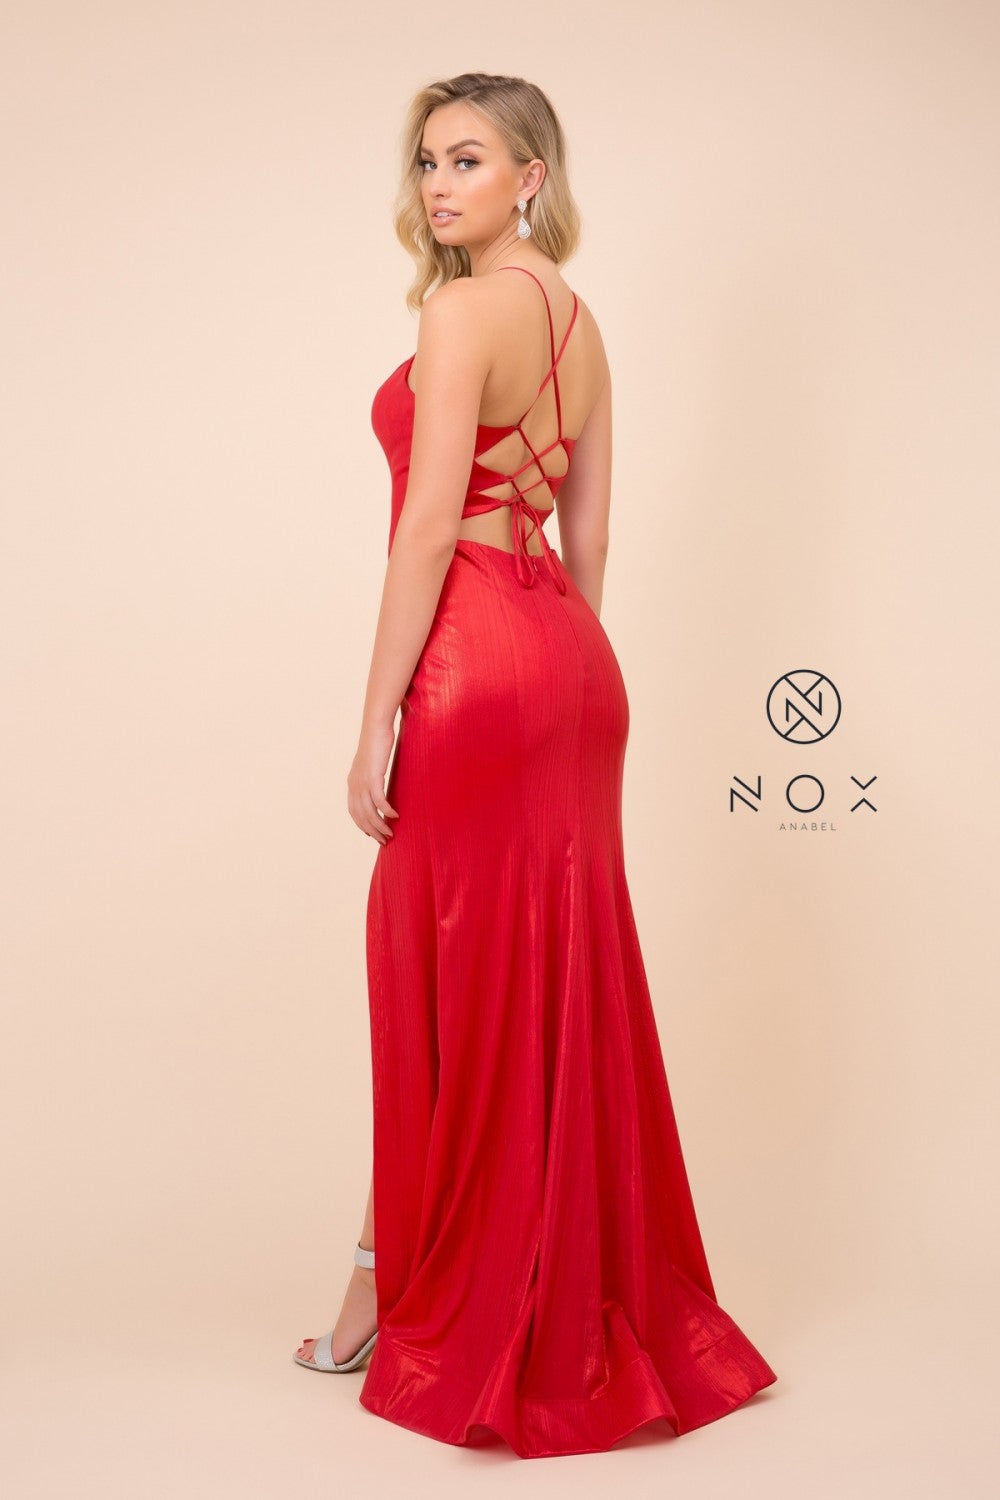 N M413 - Metallic Fit & Flare Prom Gown with Mock Lace Up Bodice Lace Up Corset Back & Leg Slit Dresses Nox 4 Red 